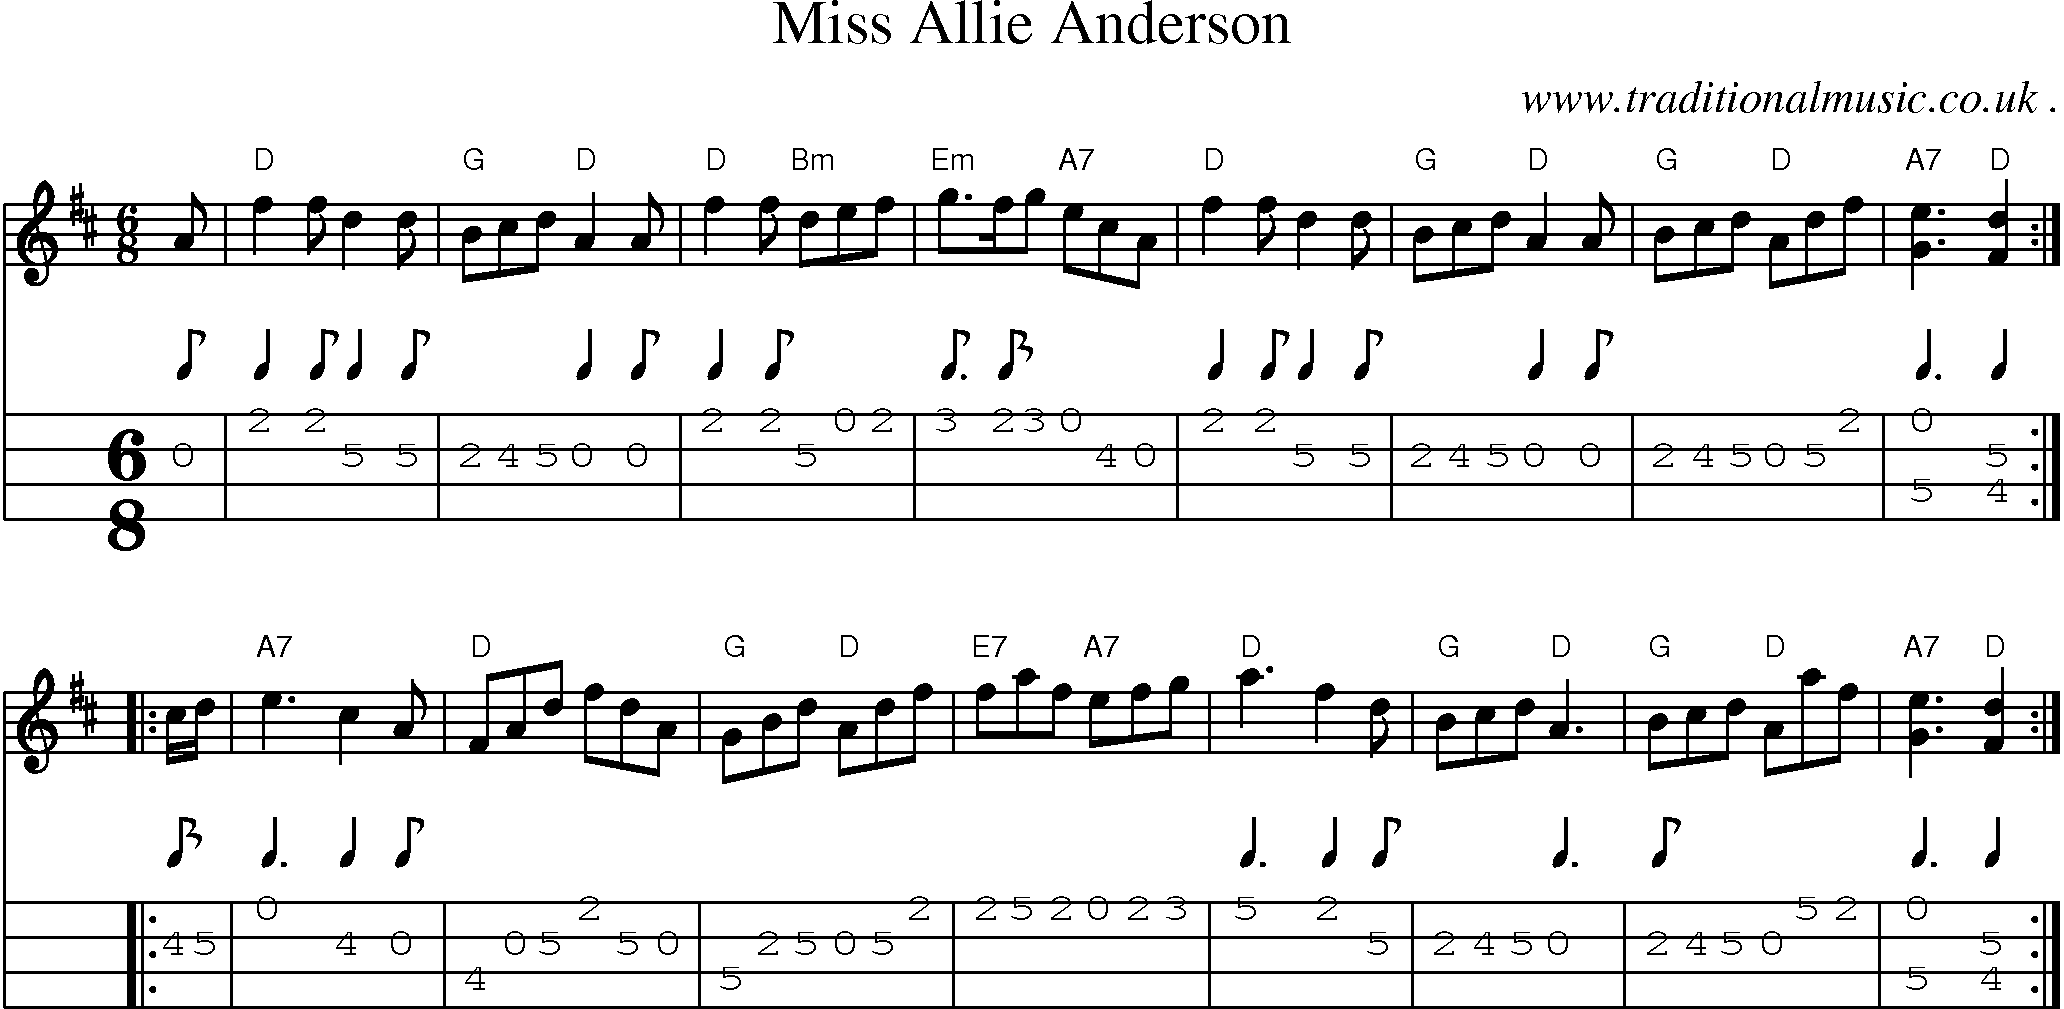 Sheet-music  score, Chords and Mandolin Tabs for Miss Allie Anderson